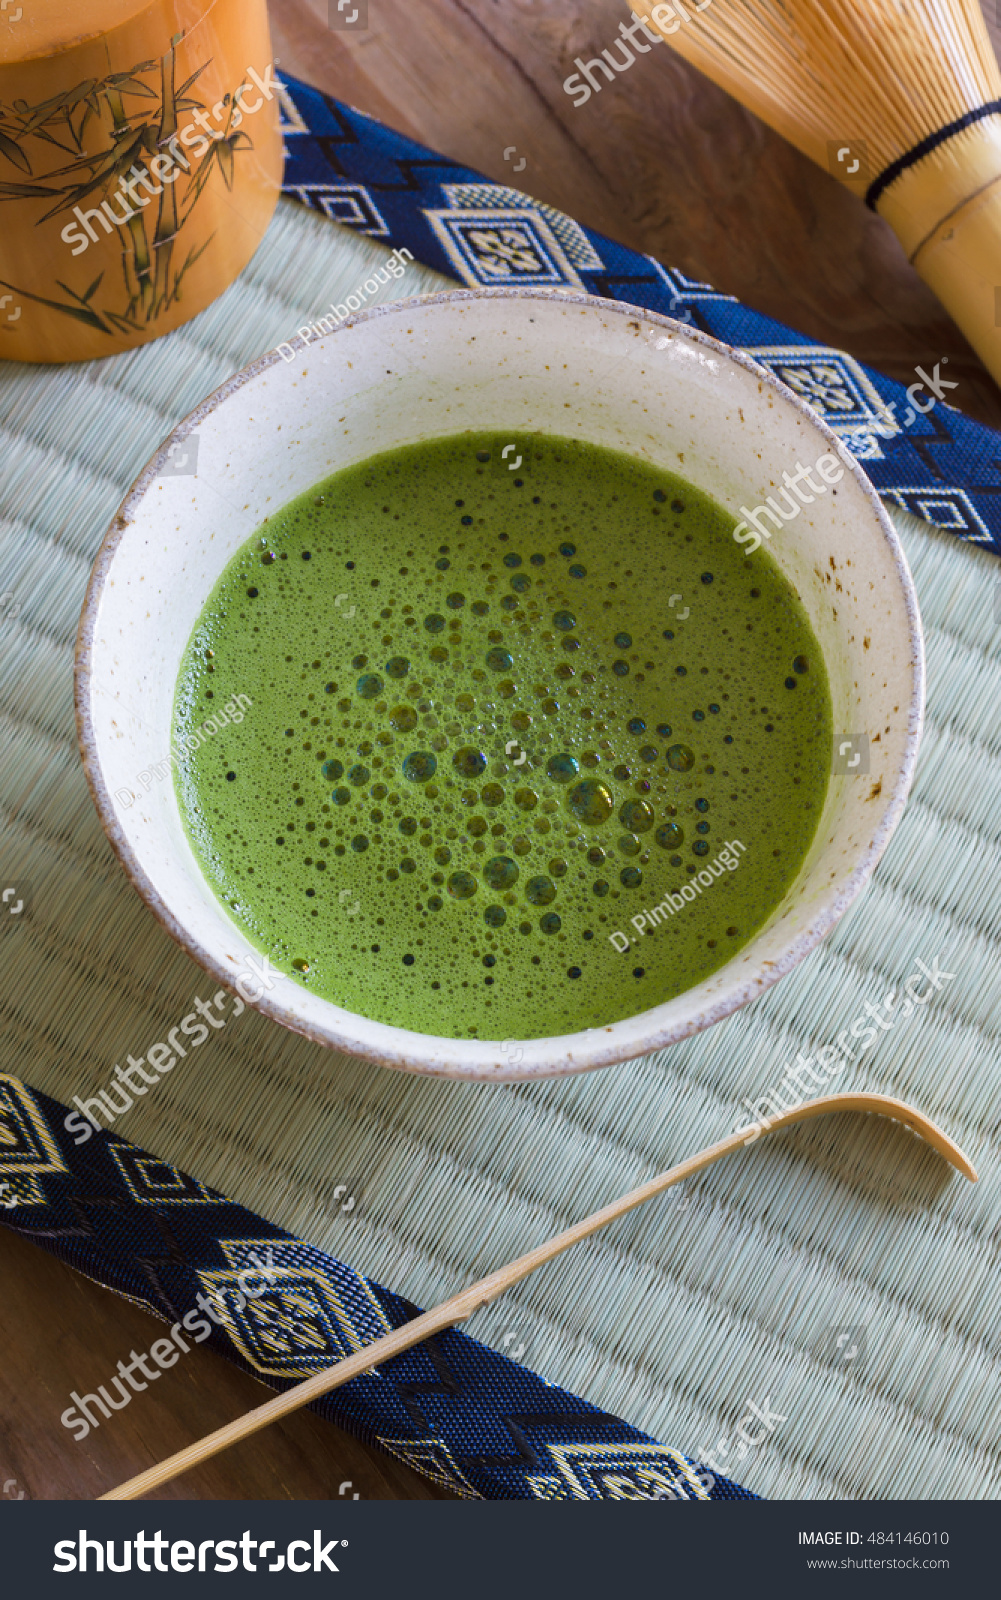 Japanese Matcha green tea in a chawan or traditional ceramic bowl with a tatami mat background #484146010